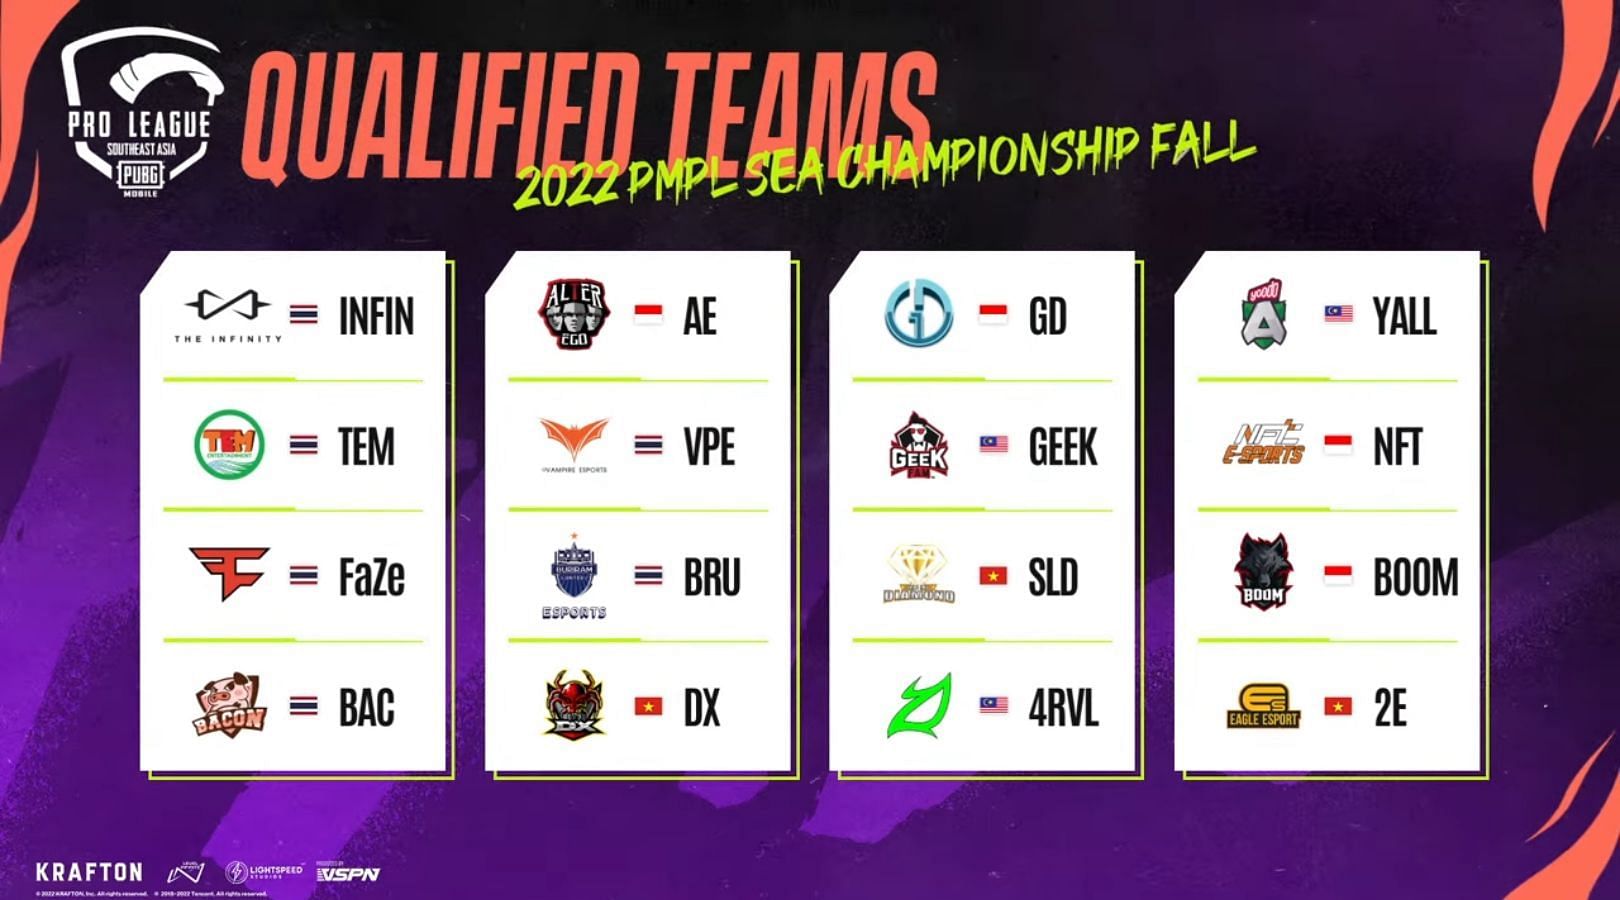 Qualified teams for PMPL SEA Championship Fall 2022 Fall Grand Finals (Image via PUBG Mobile)